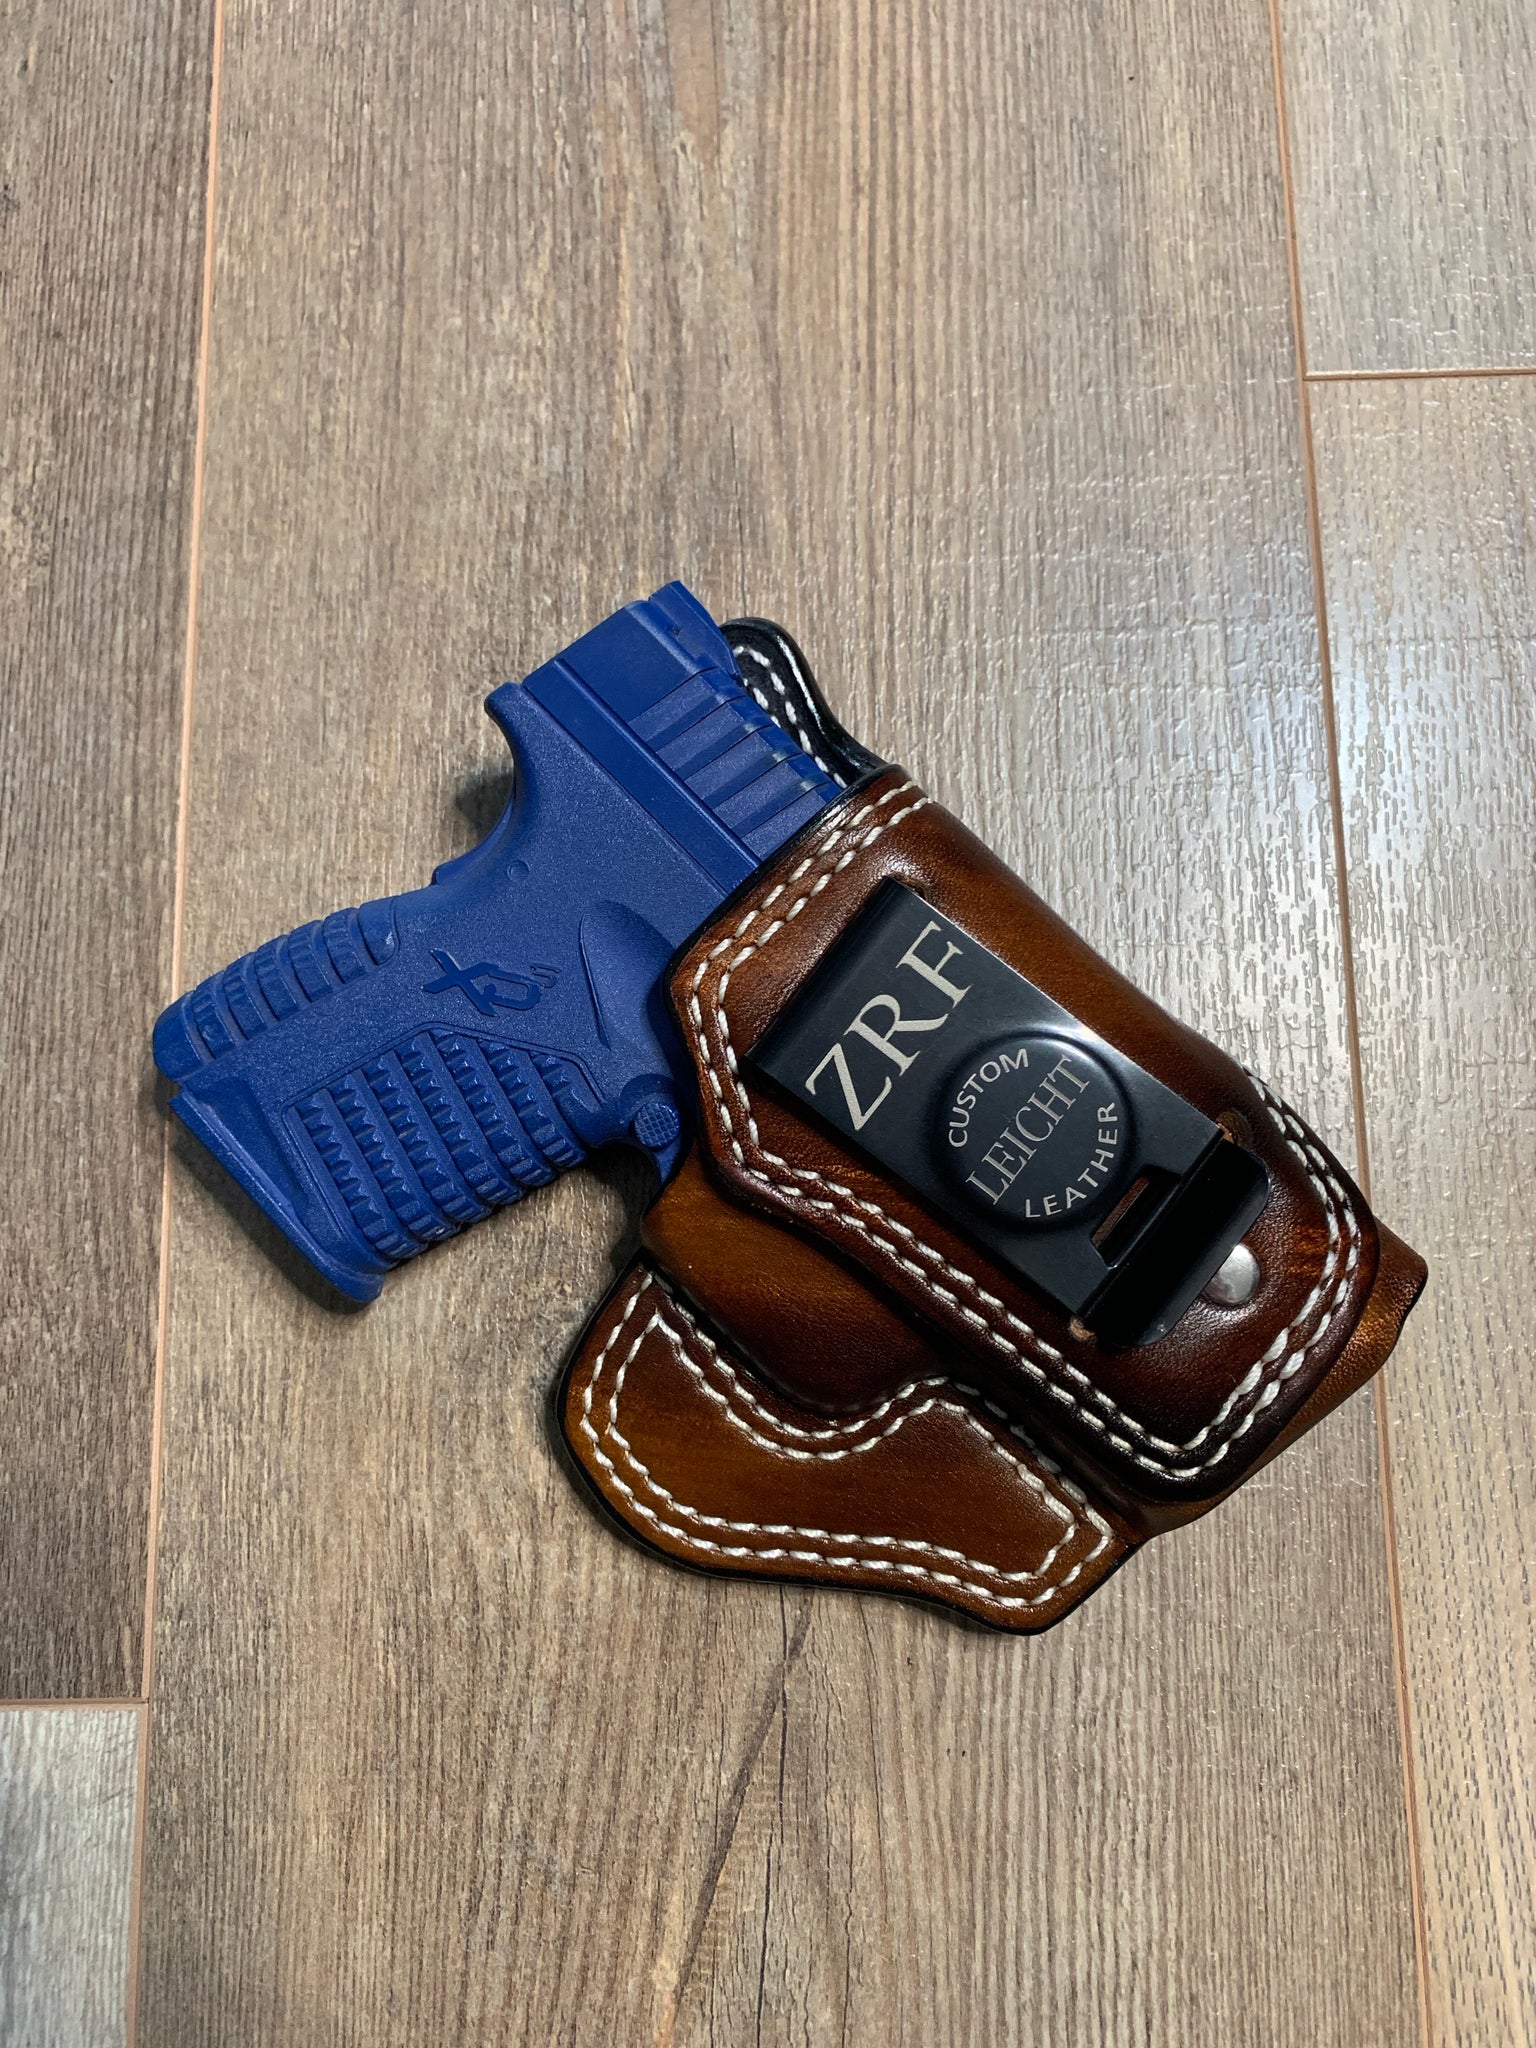 Springfield XDS 3.3 IWB HOLSTER